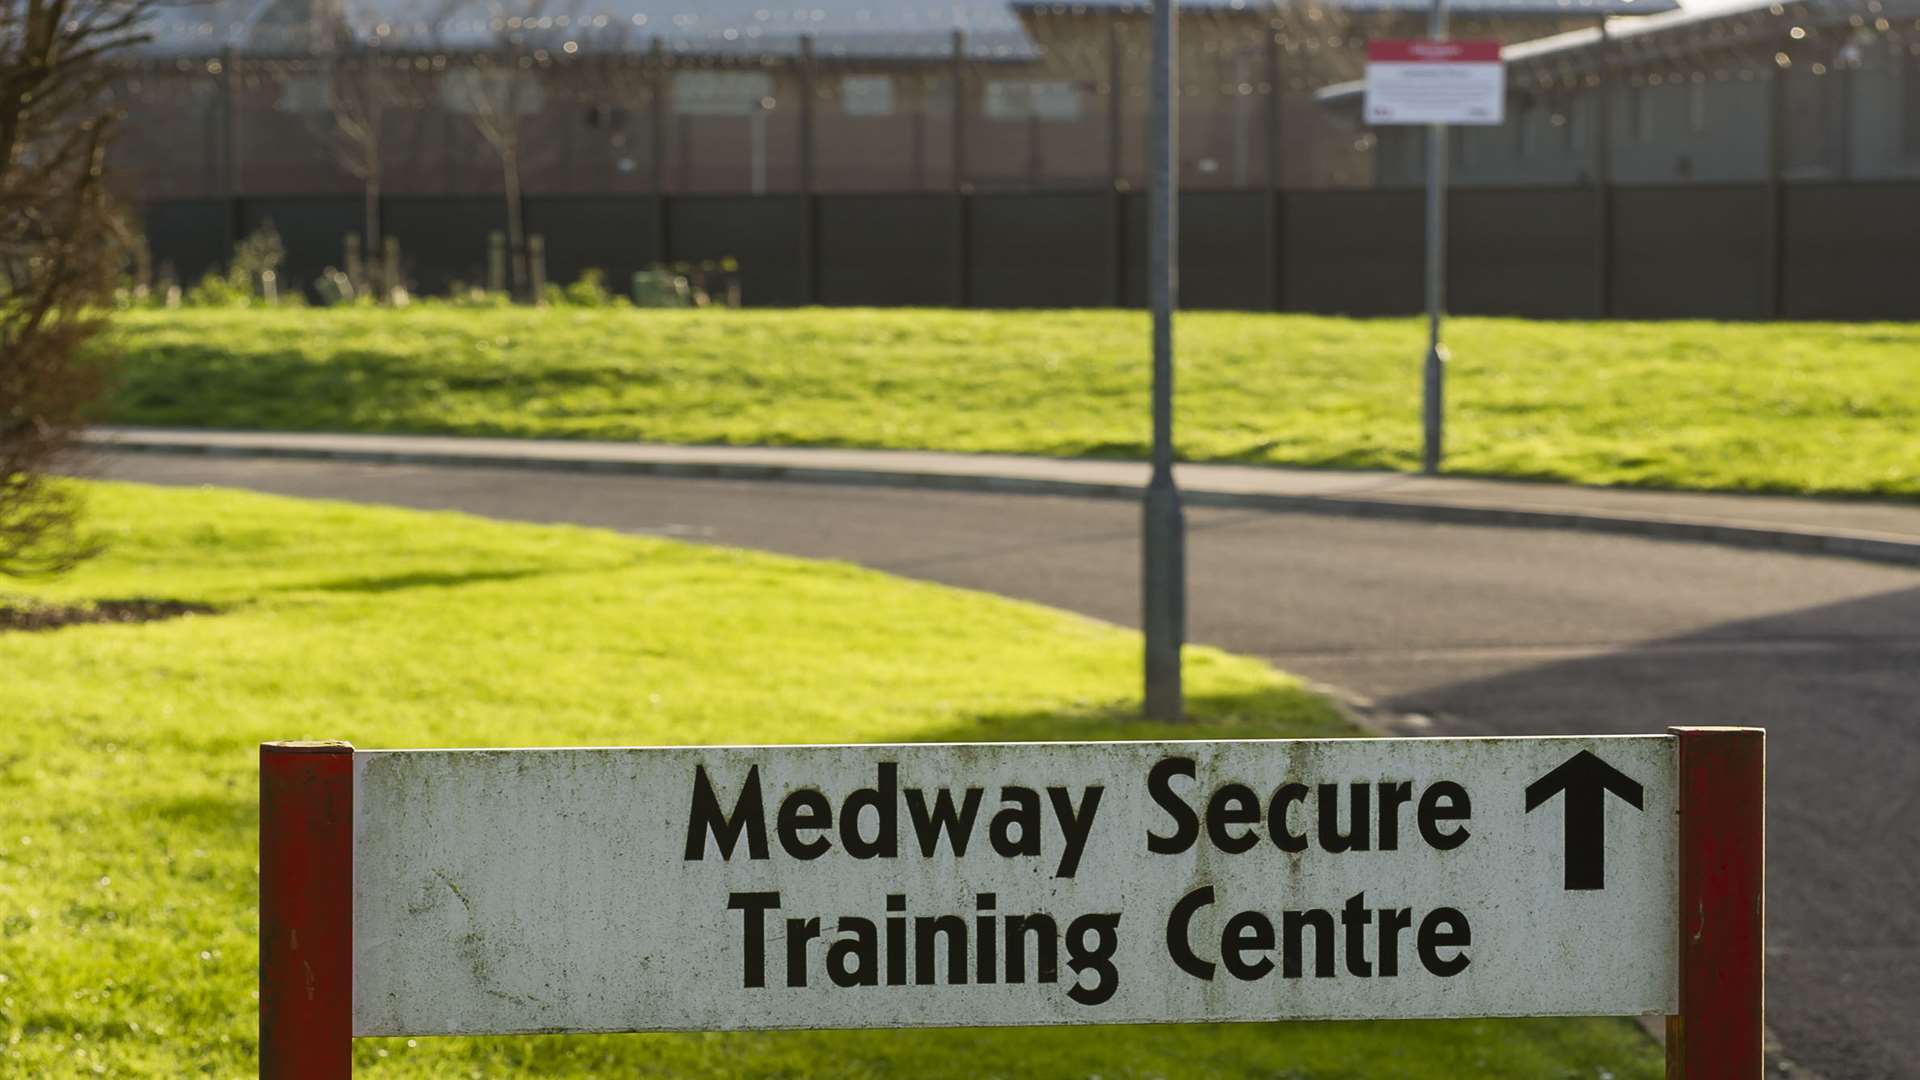 Medway Secure Training Centre